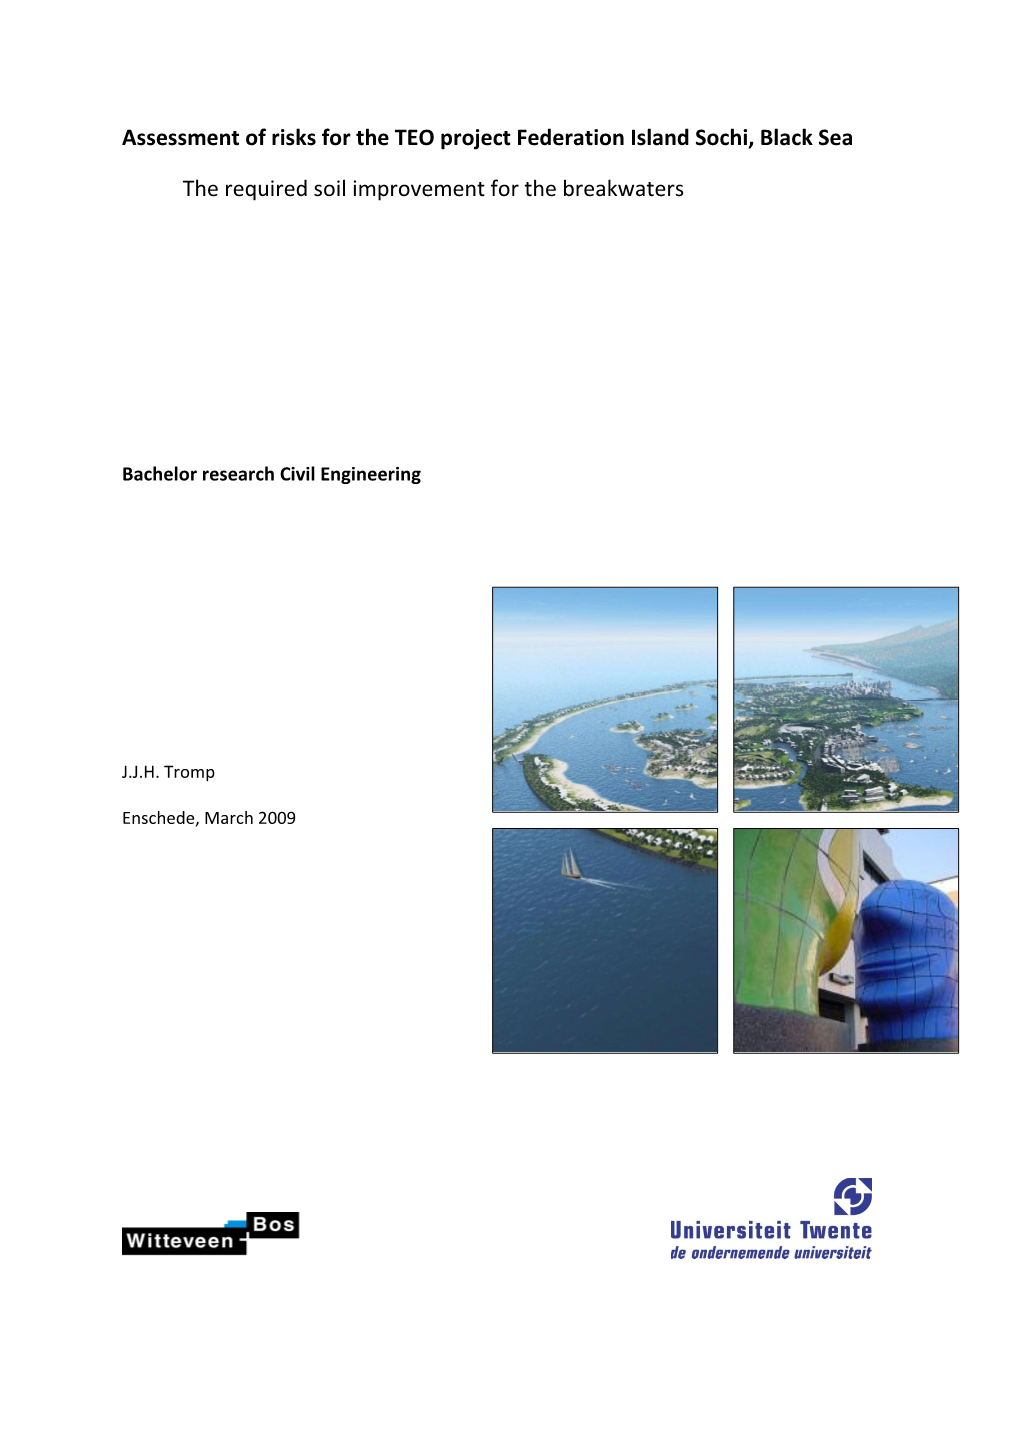 Assessment of Risks for the TEO Project Federation Island Sochi, Black Sea